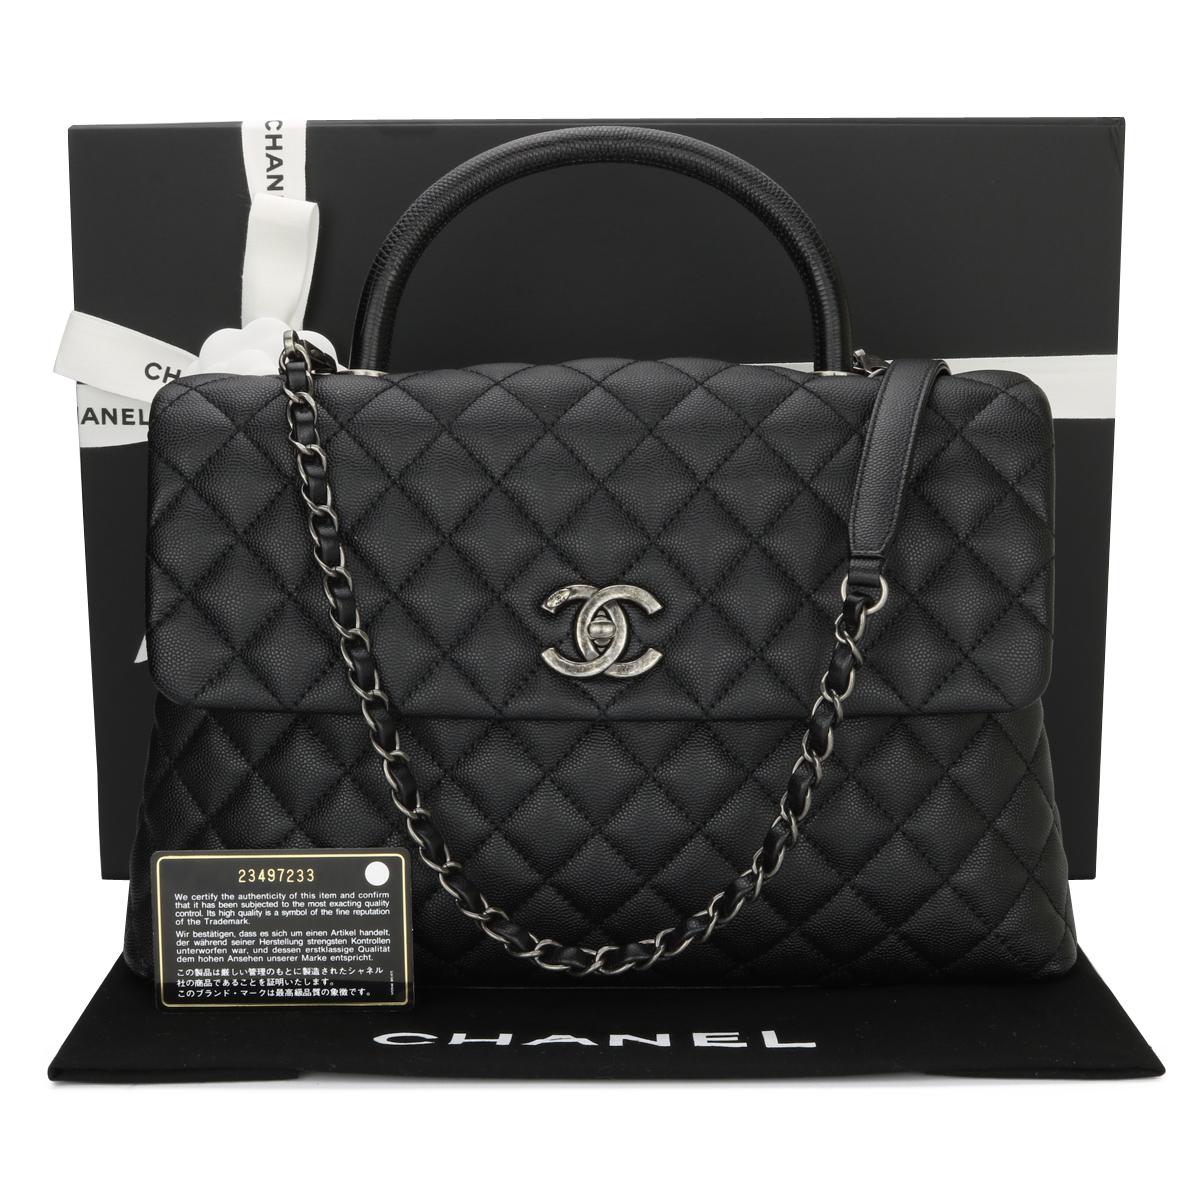 CHANEL Coco Top Handle Bag Large Black Caviar in Lizard Handle with Ruthenium Hardware 2017.

This bag is in excellent condition, the bag still holds its original shape, and the hardware is still very shiny.

This top handle bag is simply gorgeous